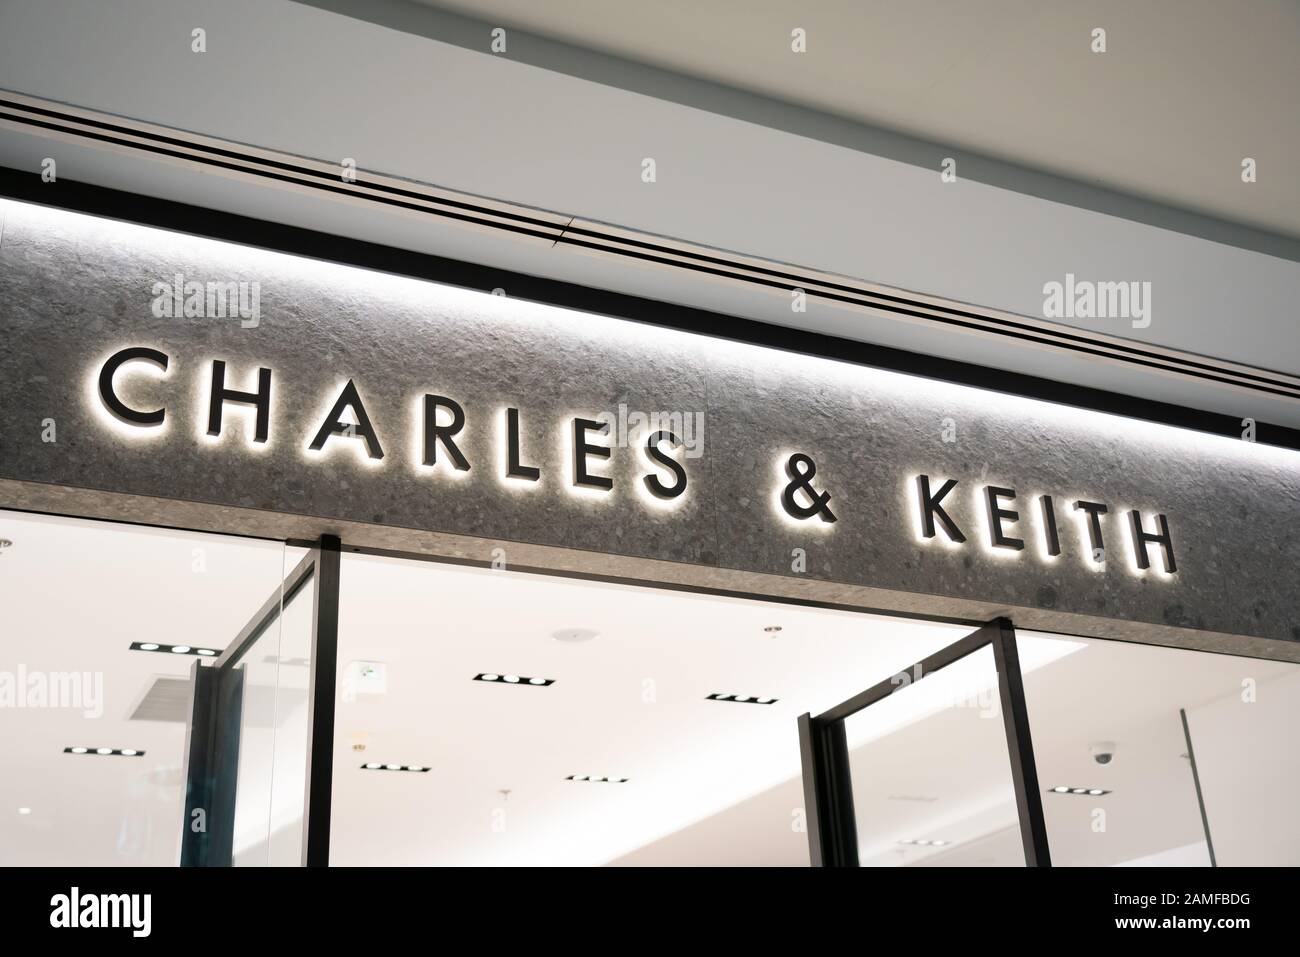 Charles & Keith - A Successful Asian Global Fast Fashion Retail